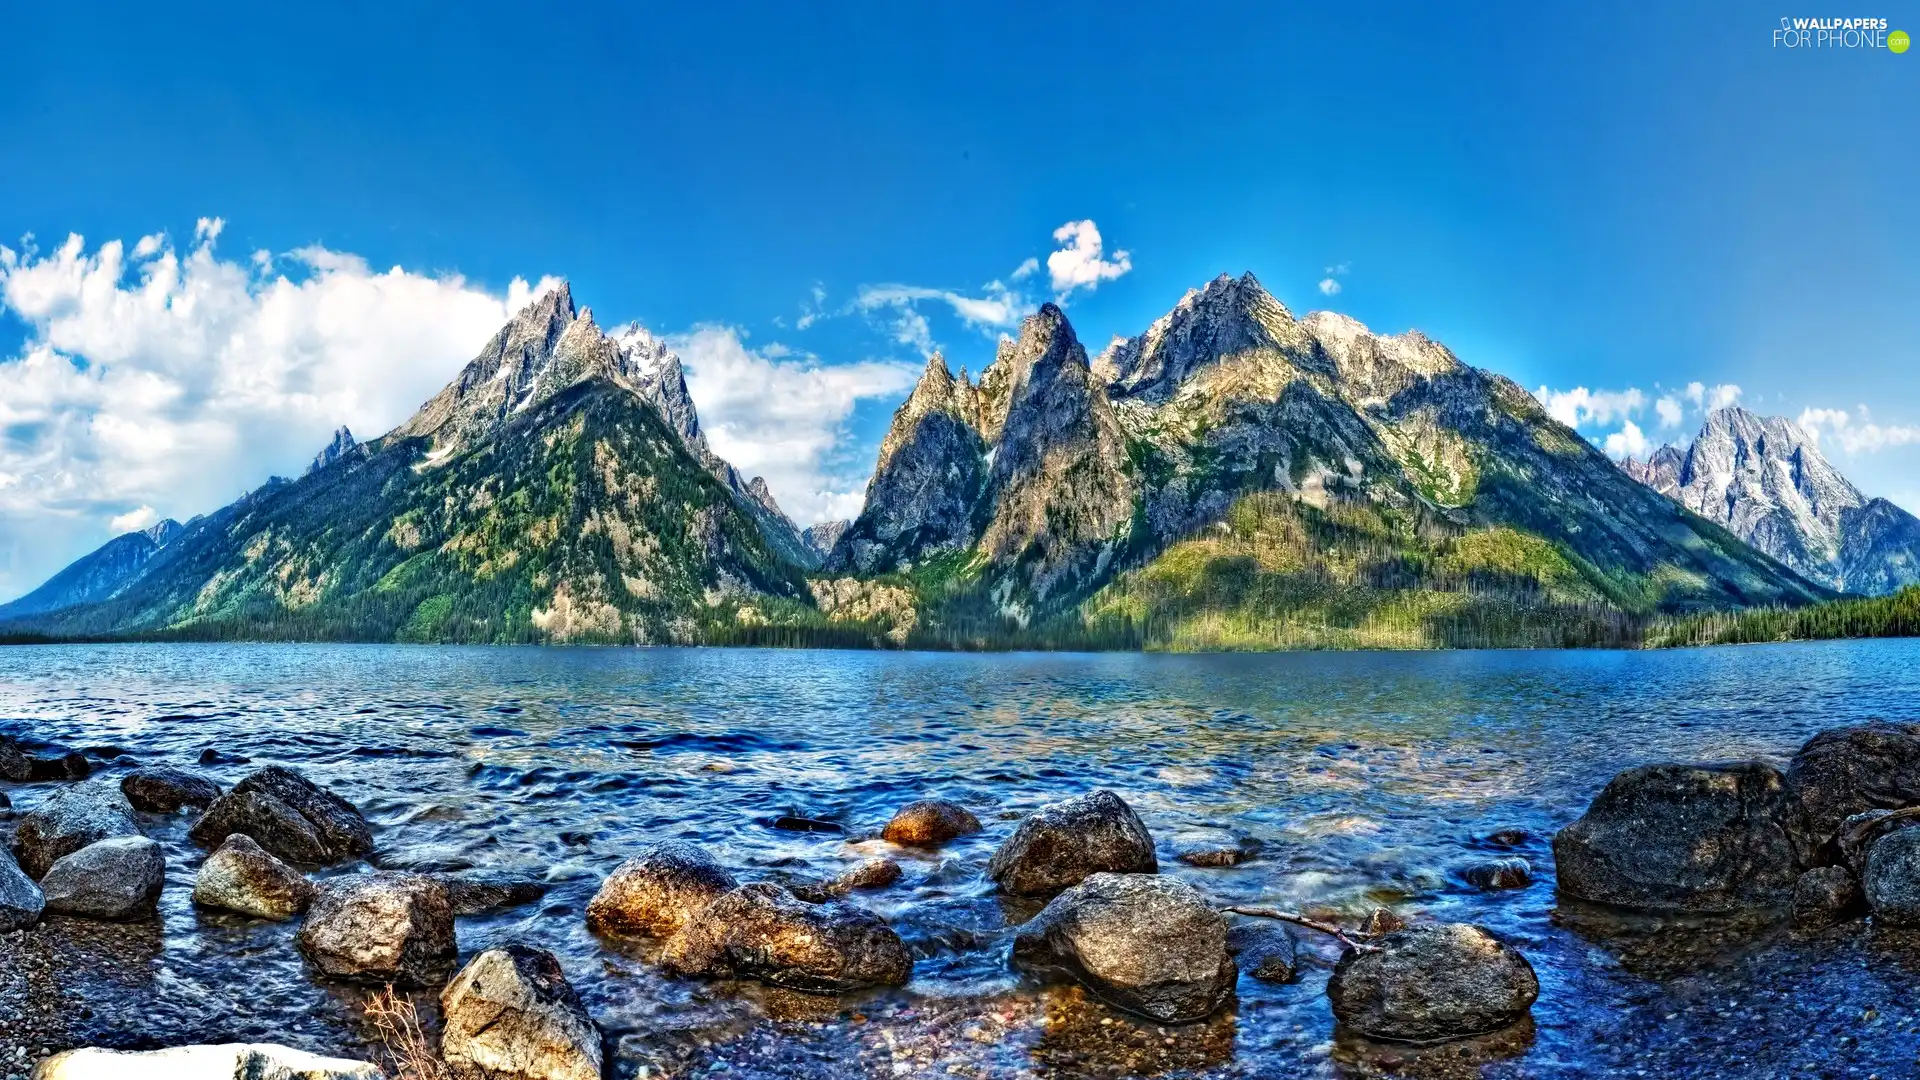 Mountains, lake, Stones, clouds